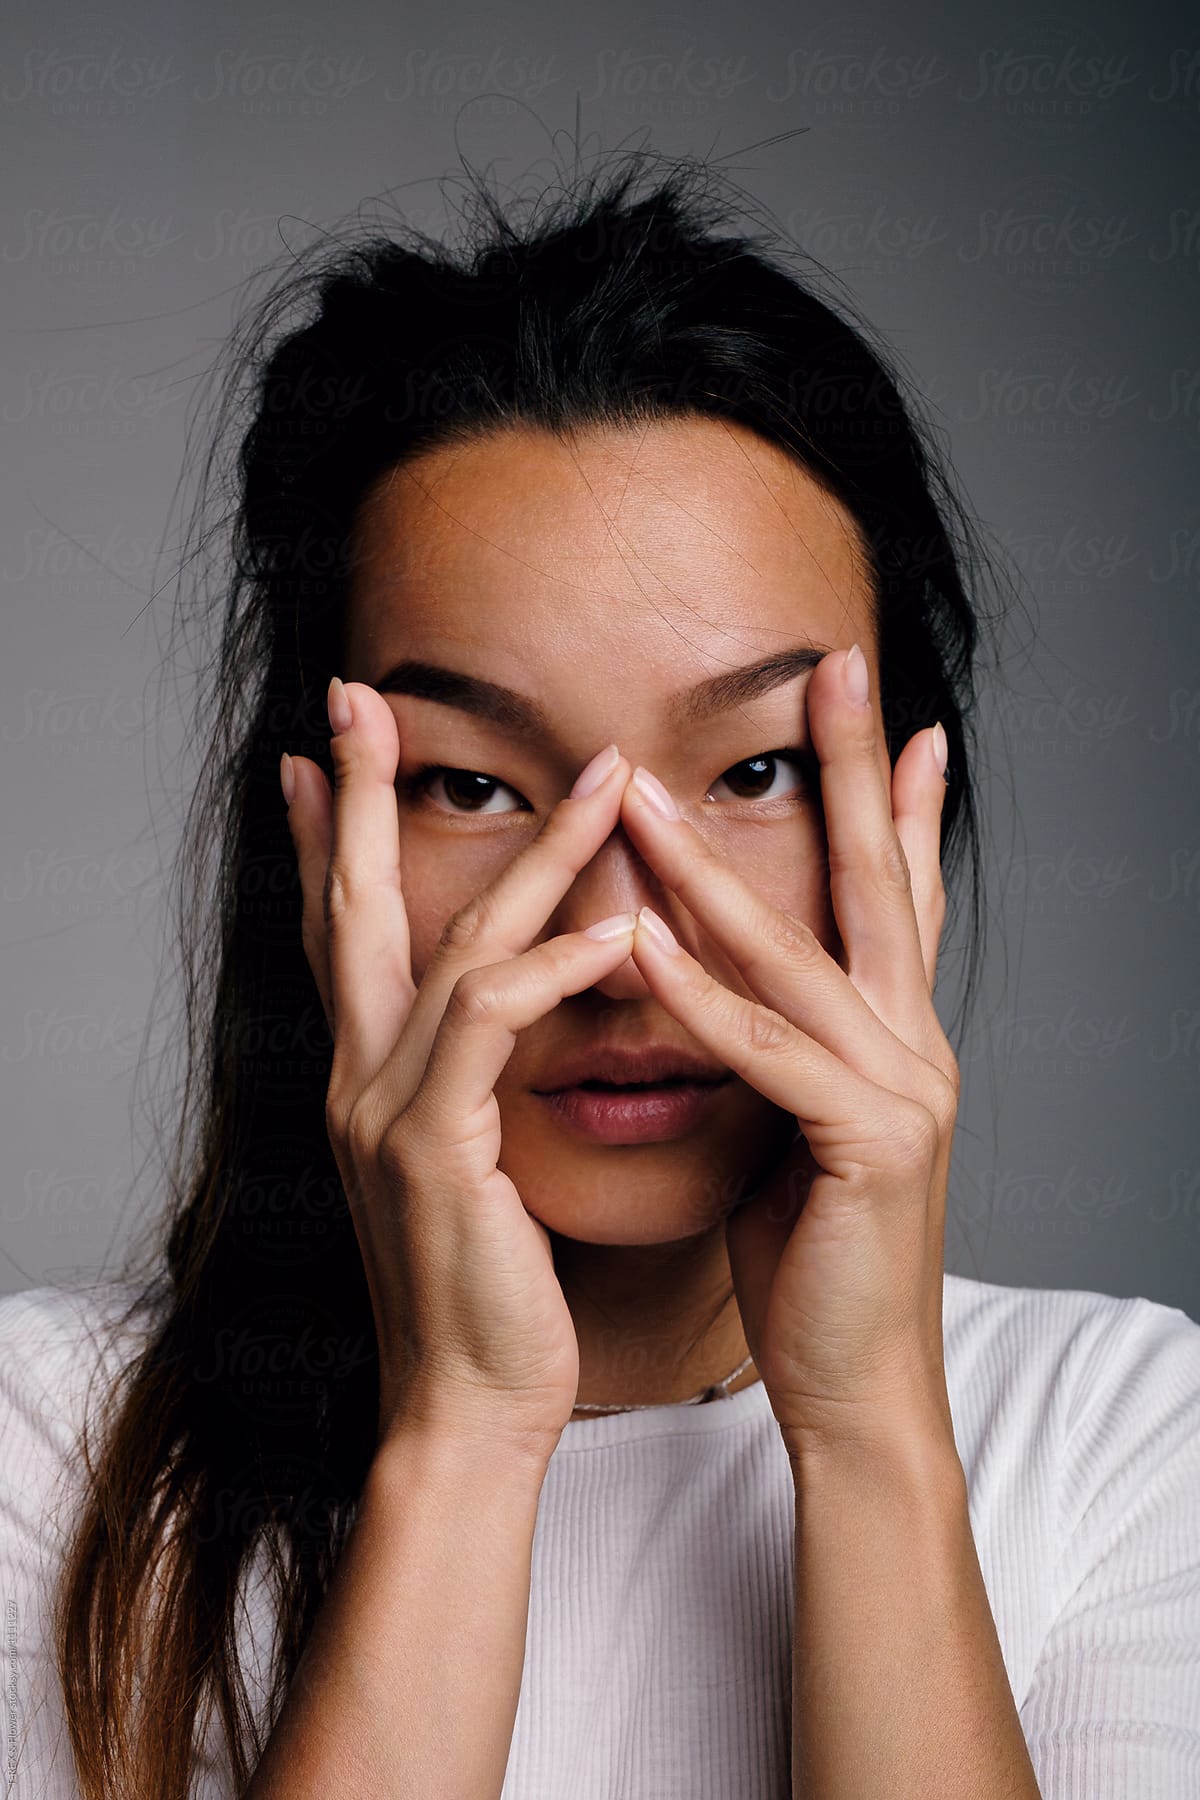 Asian Model With Hands On Face By Stocksy Contributor Danil Nevsky